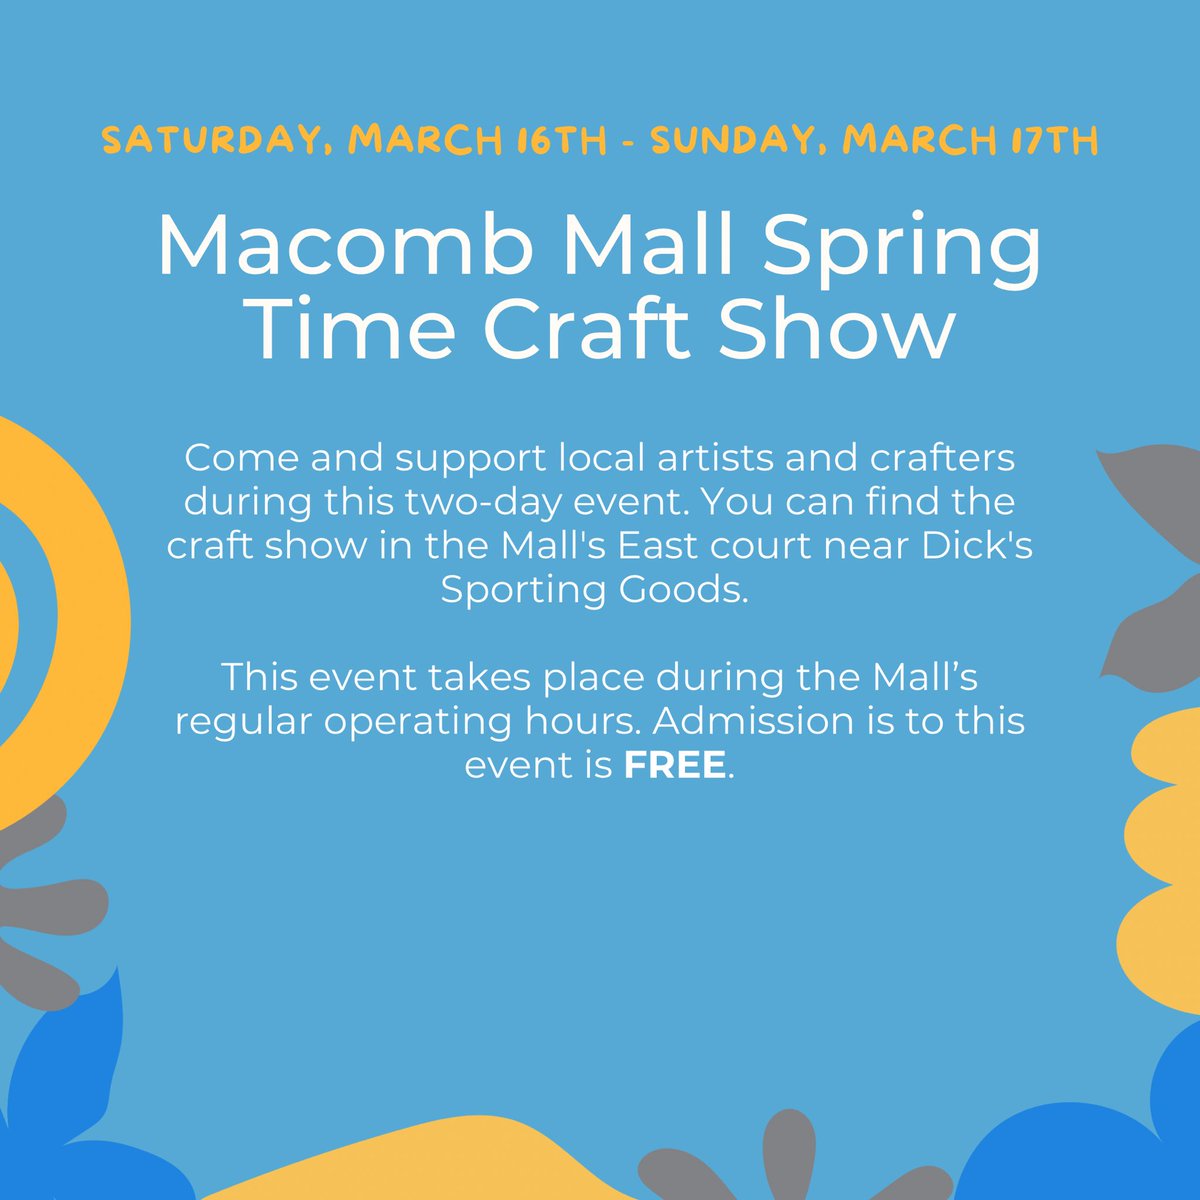 One of the best ways to engage with your community is by attending local events! Here is a list of just a few things happening around Macomb County this week. Let us know below if you’re planning on attending any of these great events!